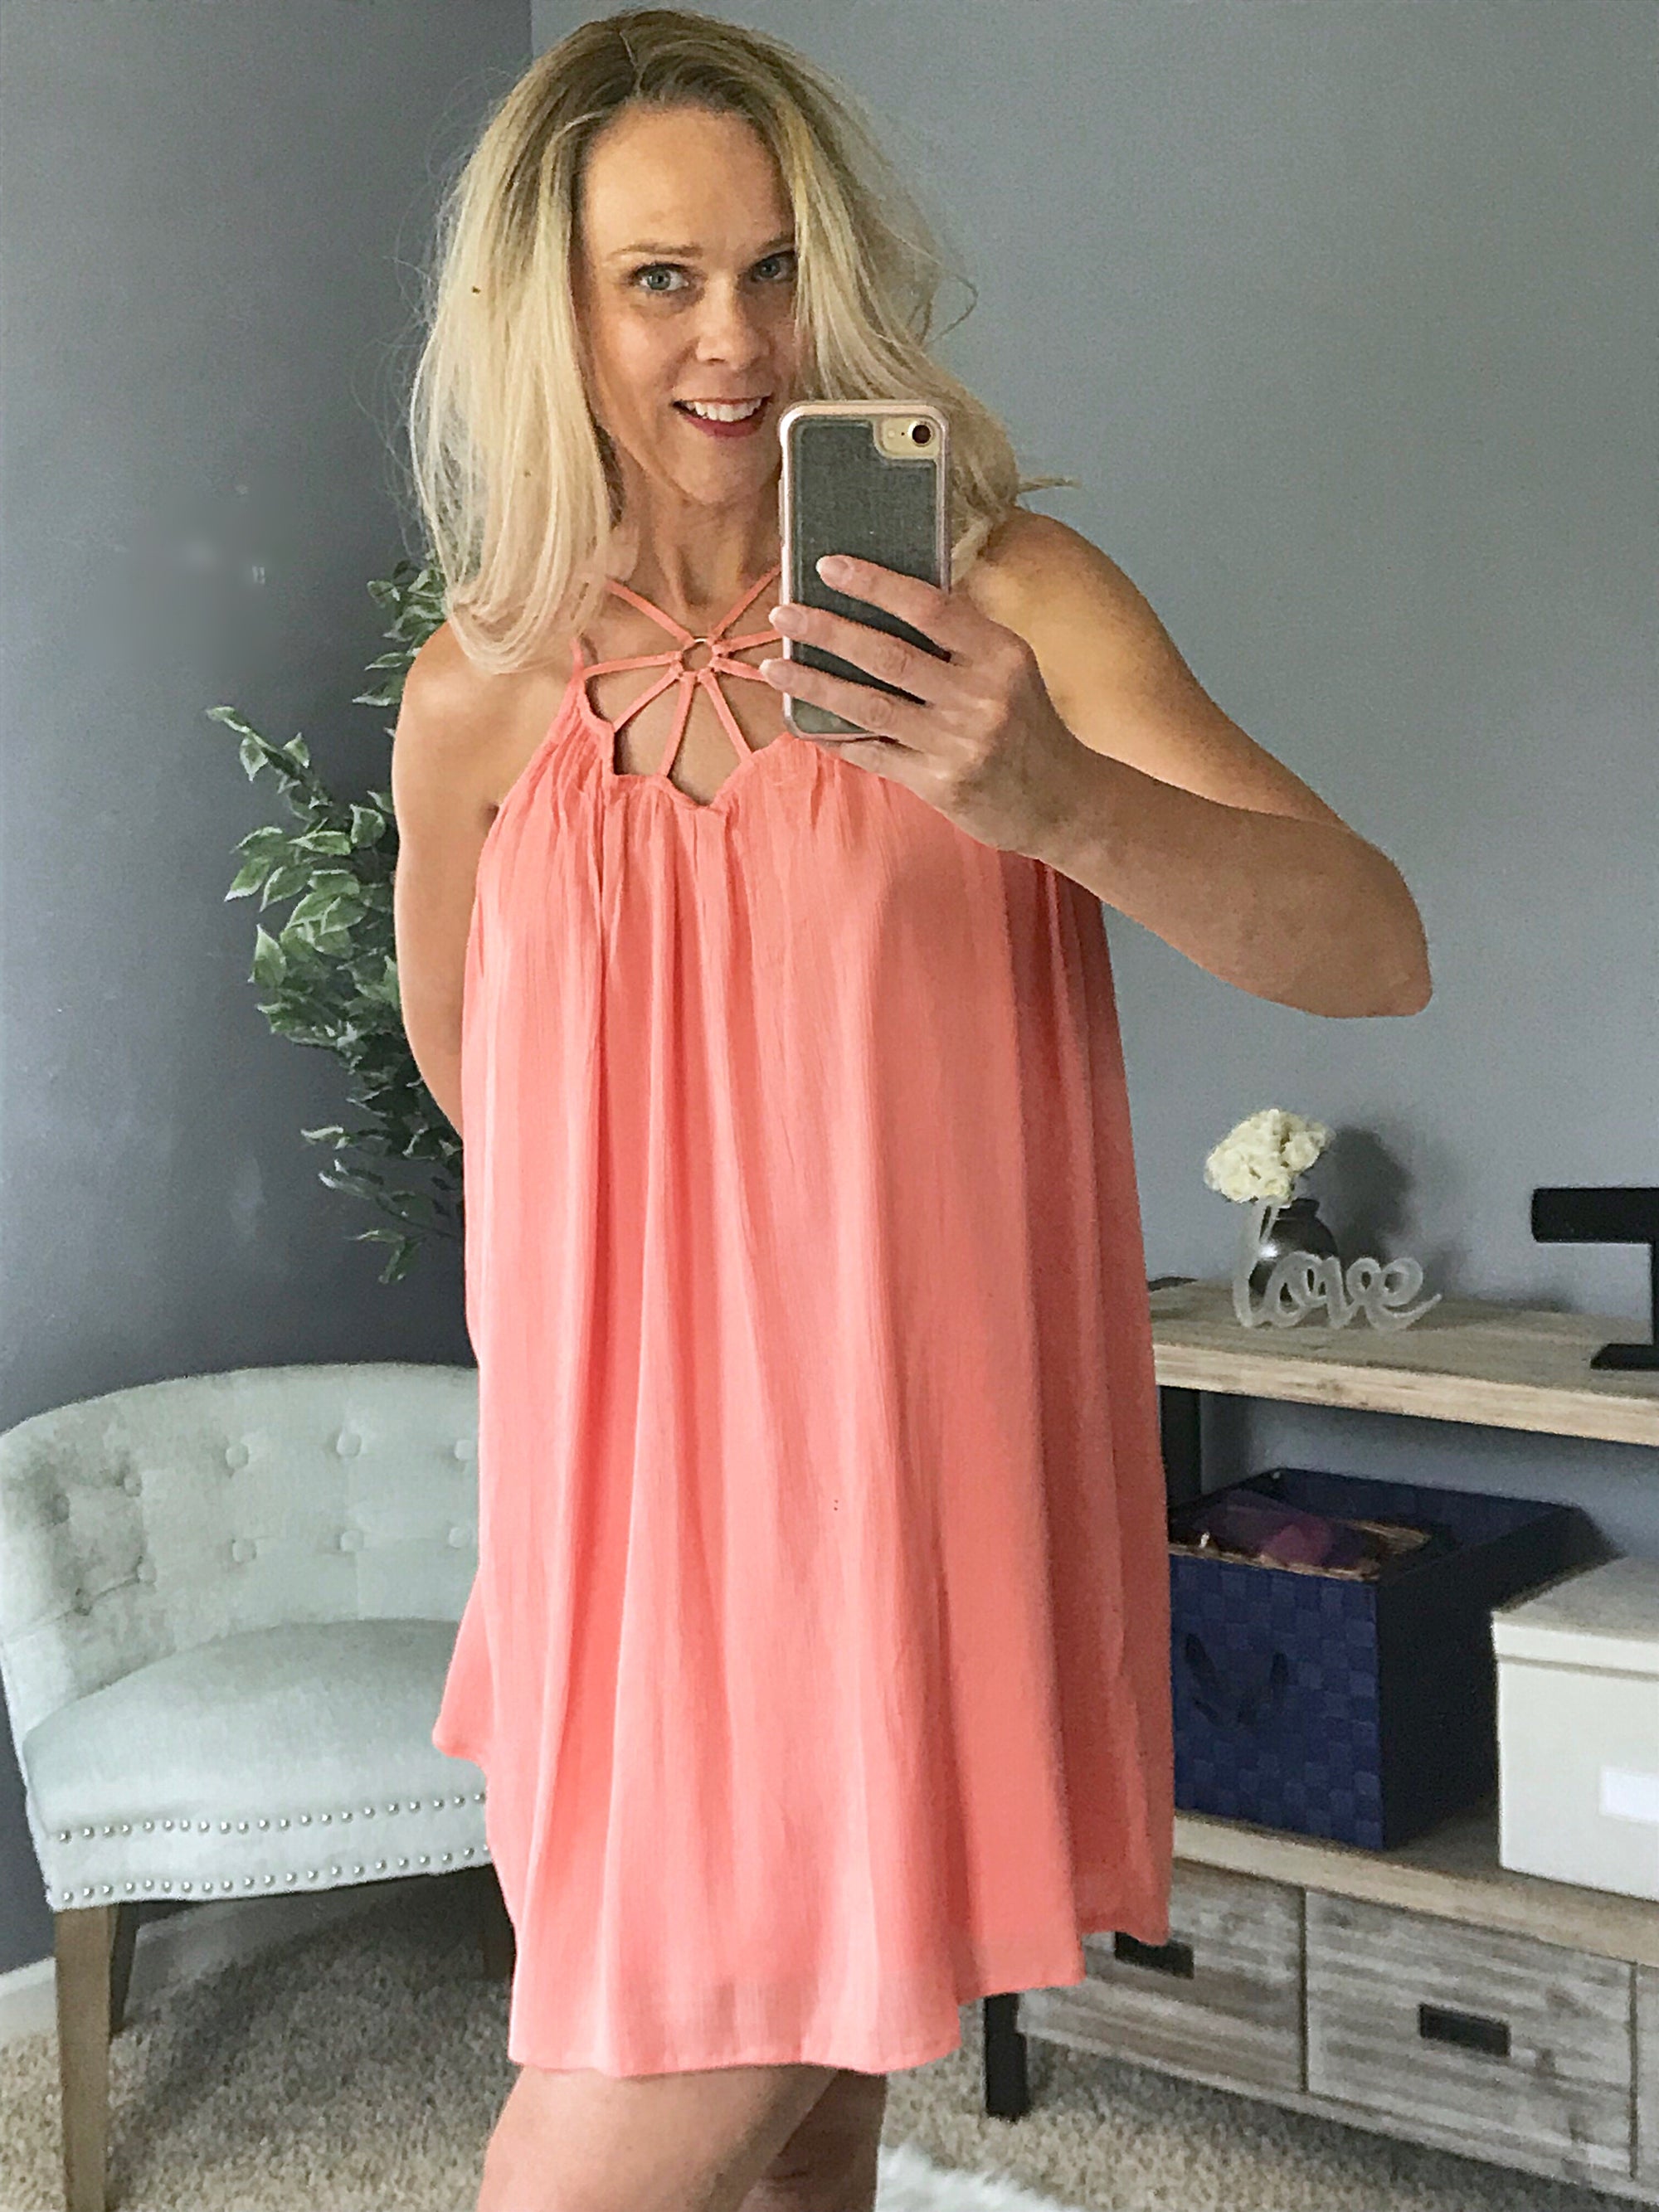 Caged Love Dress  - The Peach Mimosa 